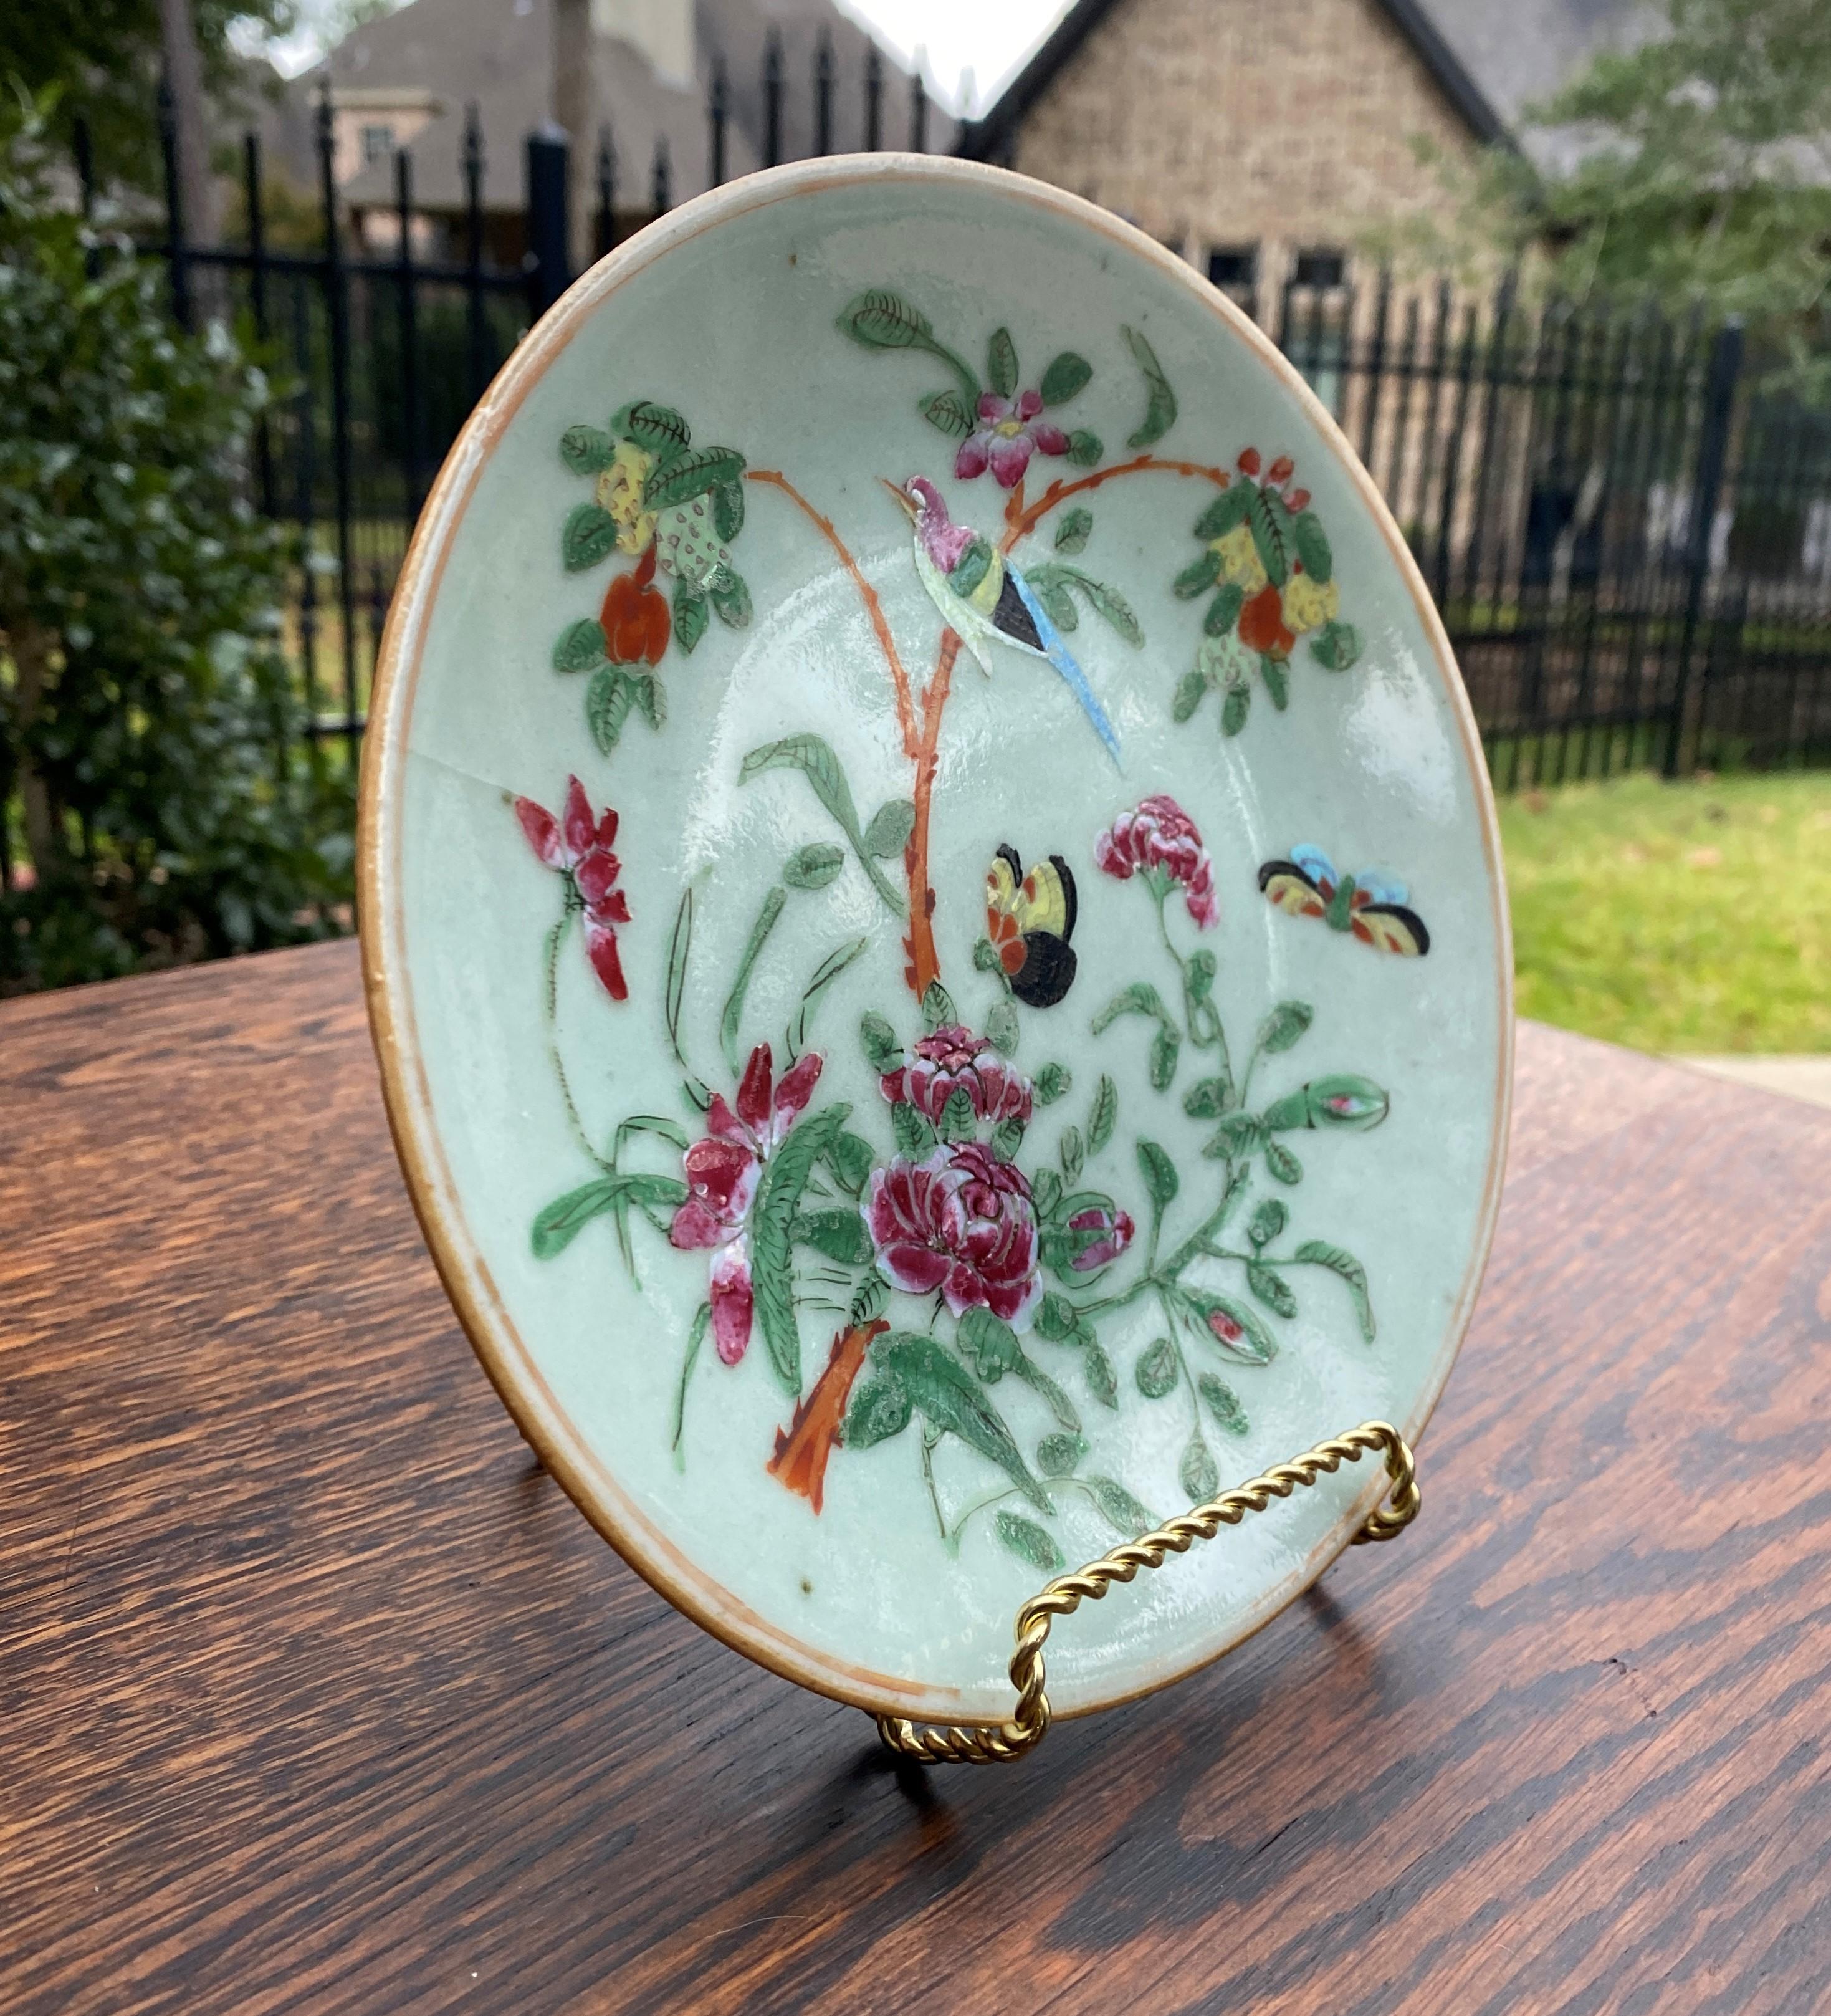 Antique Chinese Celadon plate #3~~Famille-Rose Palette~~Qing Dynasty~~c. 1820s
Beautiful antique Chinese (Canton) Celadon plate~~light green Celadon glaze with beautifully hand painted decoration in over-glaze poly-chrome enamels of the